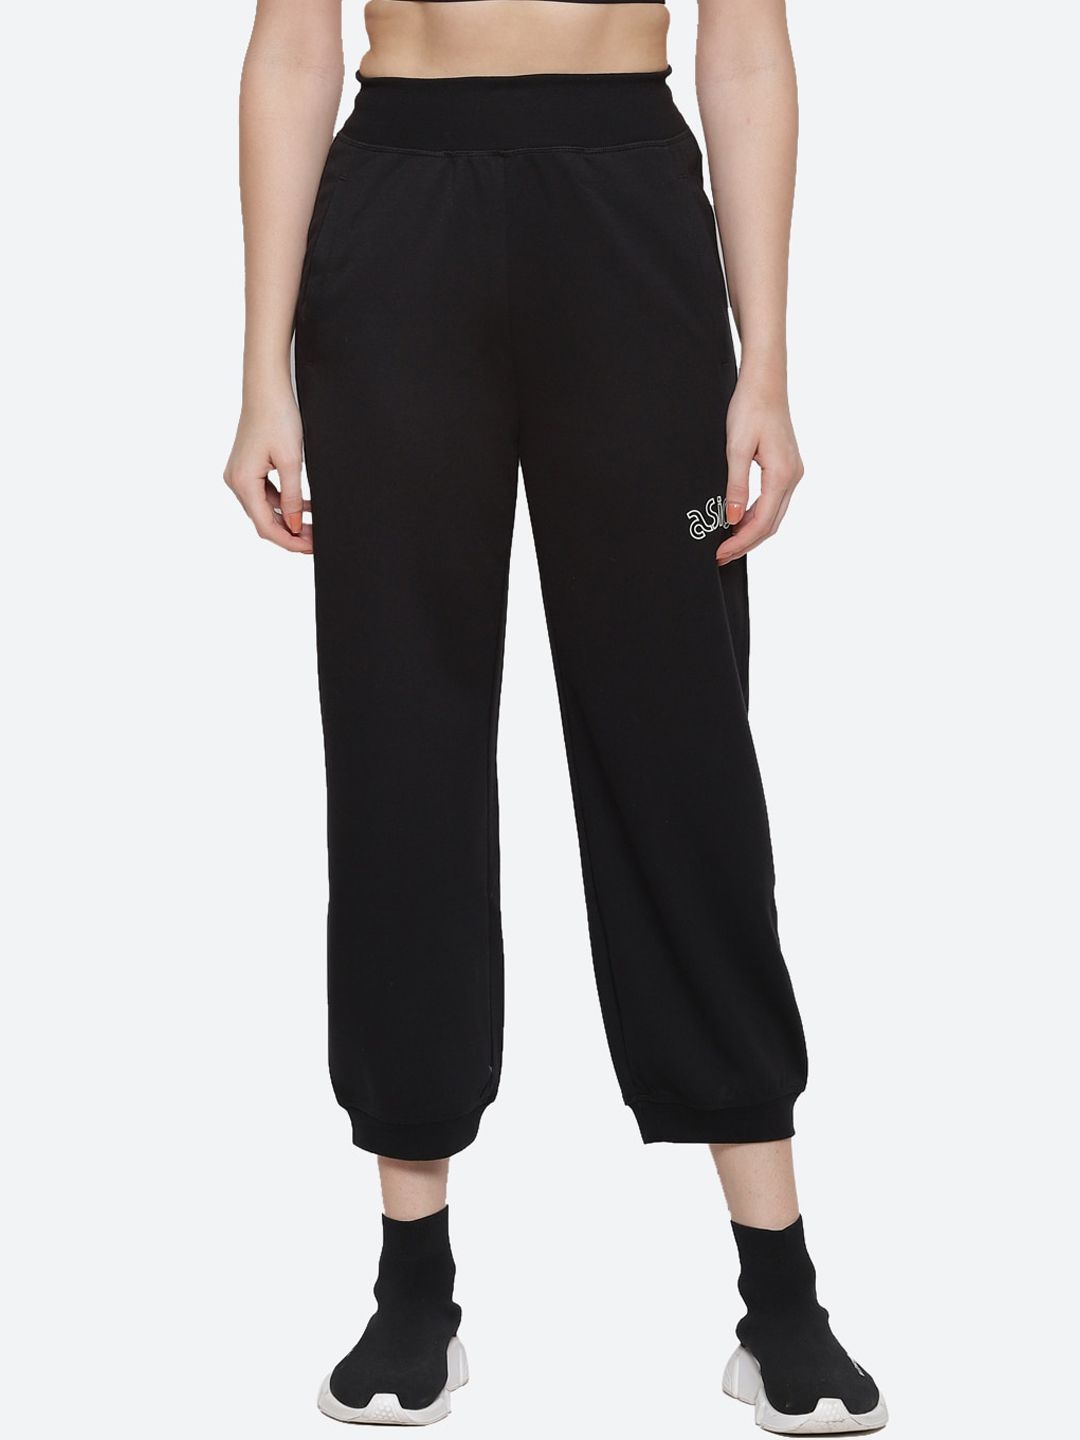 ASICS Women Black Solid Joggers Price in India